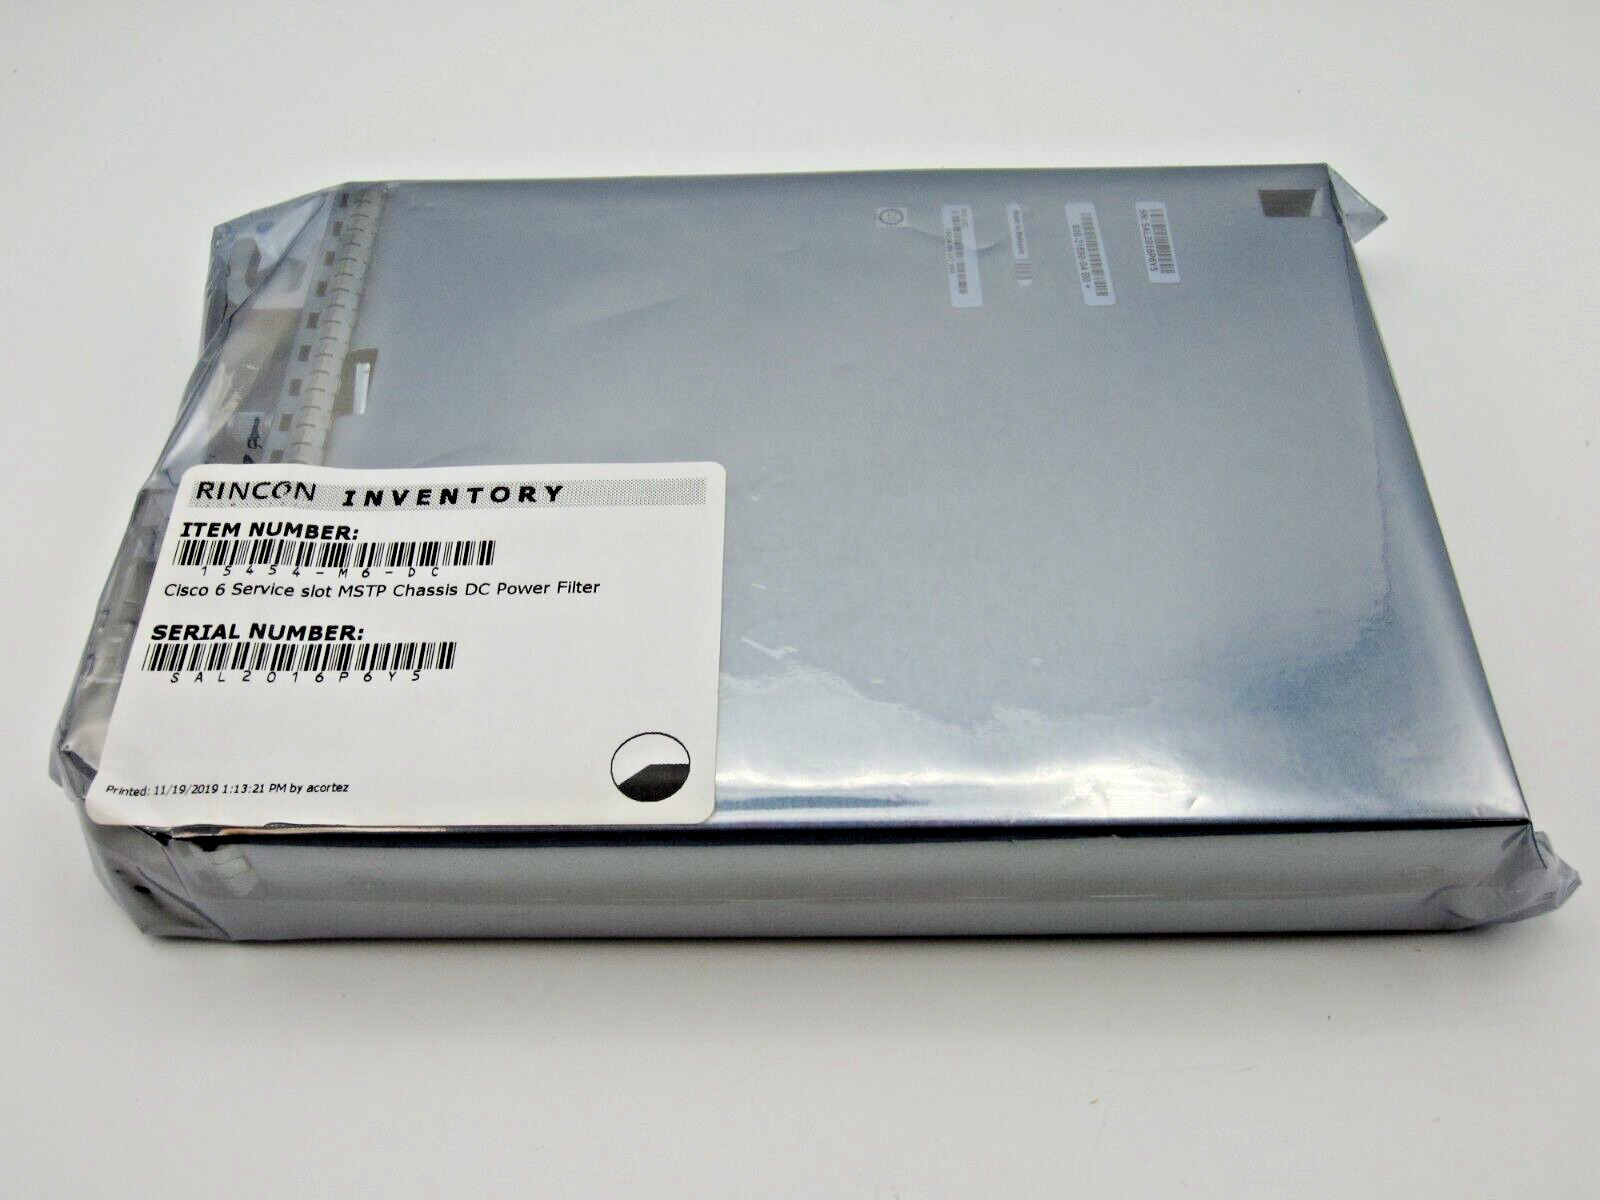 CISCO 15454-M6-DC ONS 15454 6 Slot MSTP Chassis DC Power Filter (2 in stock)